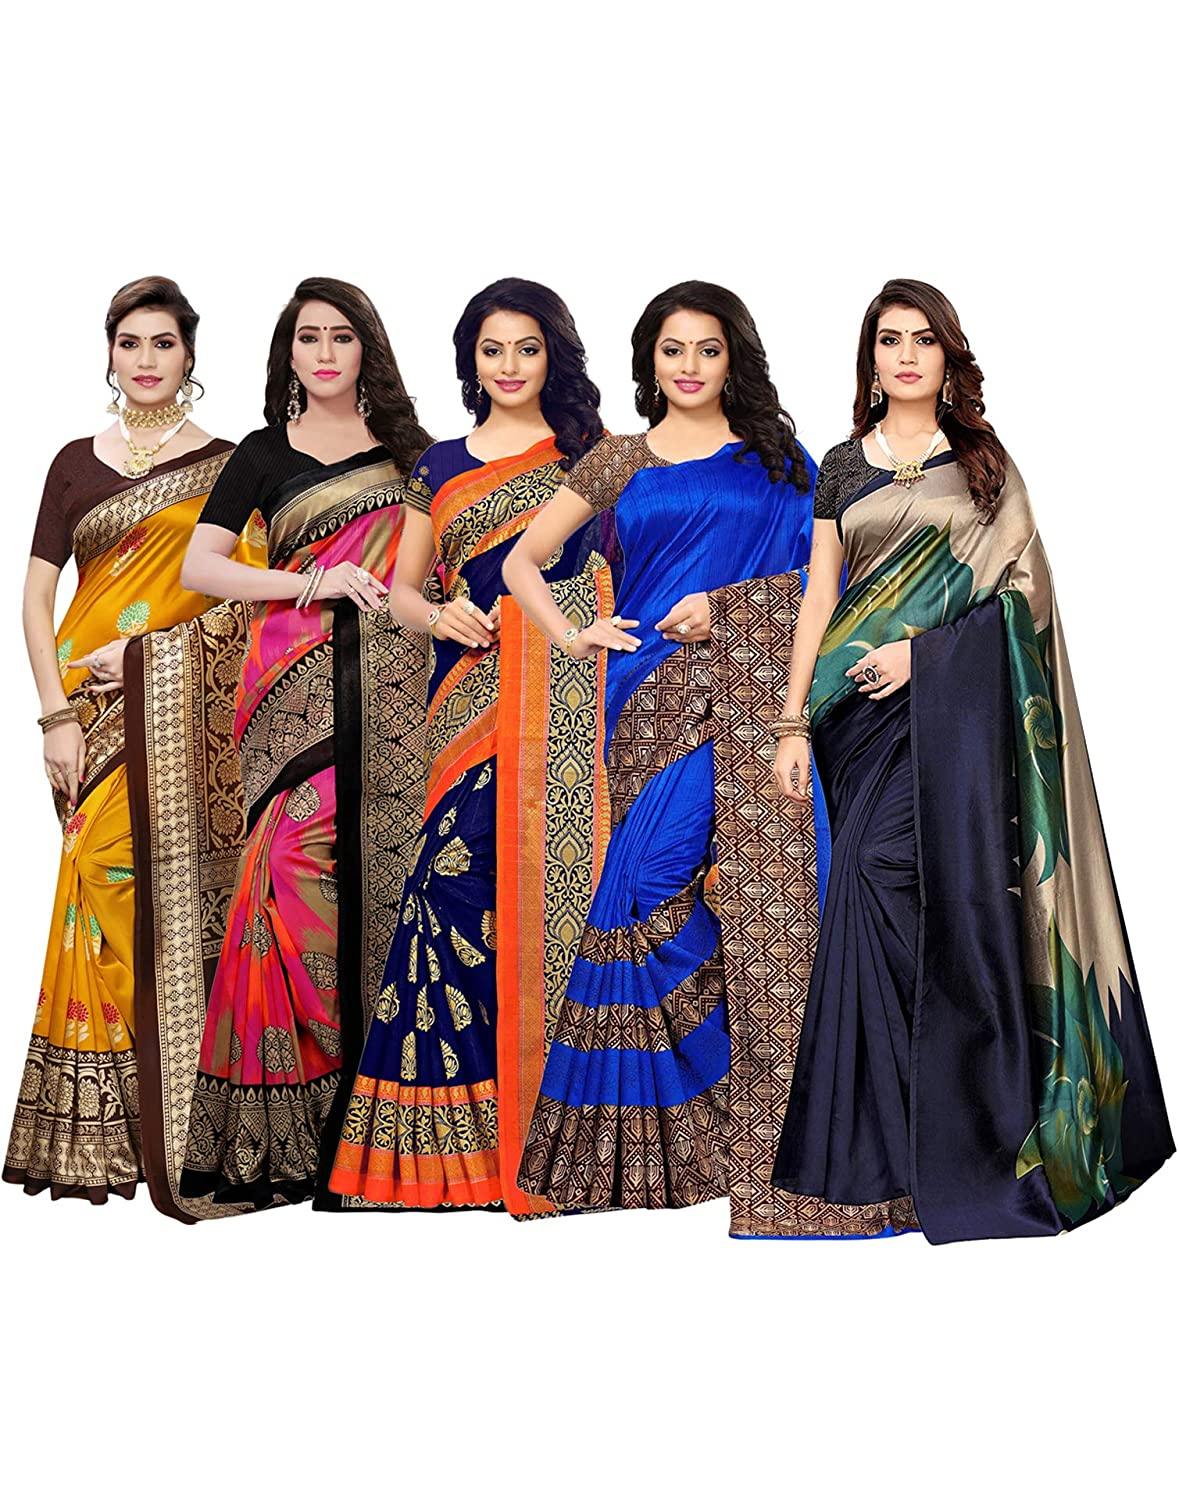 Women's Poly Silk Printed Saree Pack Of 5 - Indian Traditional Saree Wedding Dress Handmade Famous Actress Style Party Wear Free Size  Ethenic Wear Clothes For Women - FajarShuruqSA